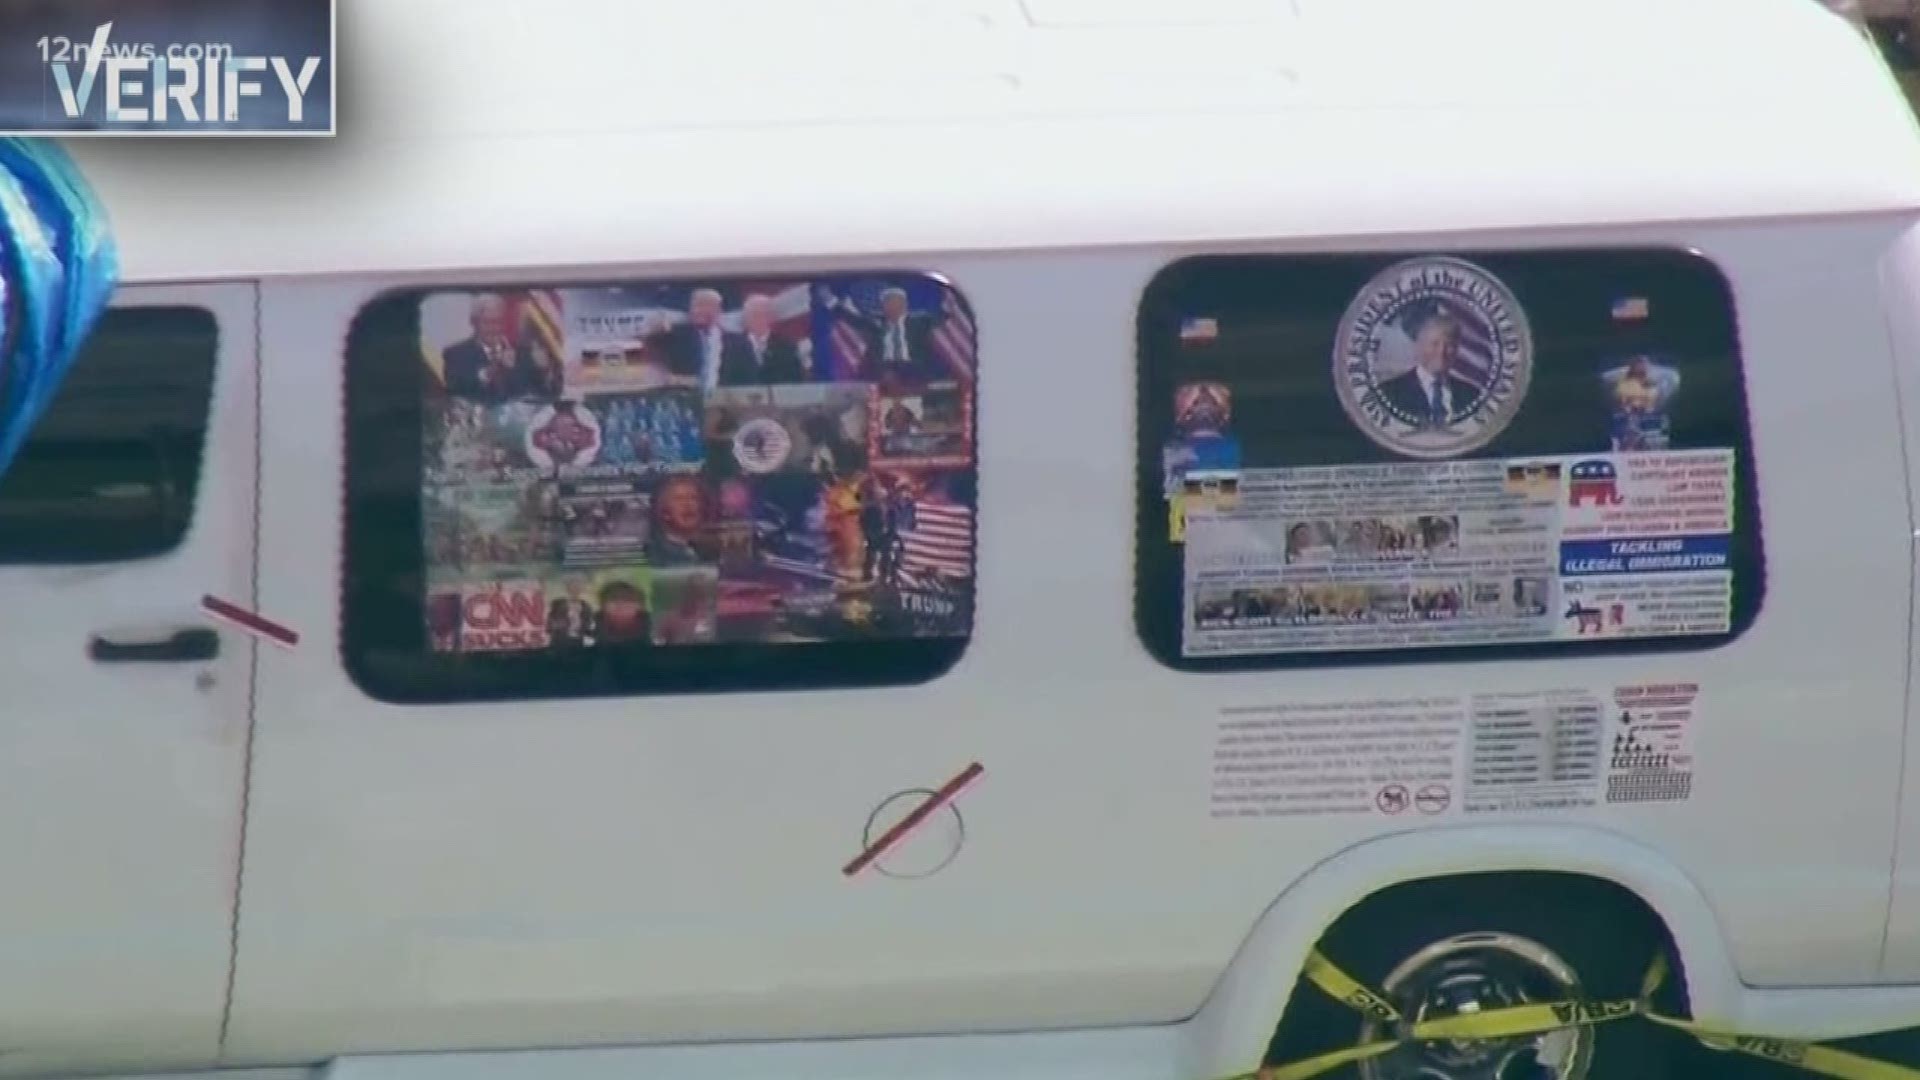 The suspect arrested in connection with the pipe bombs sent to top Democrats and critics of Trump had a van cluttered with right wing bumper stickers. We verify if those stickers make you a target for profiling.